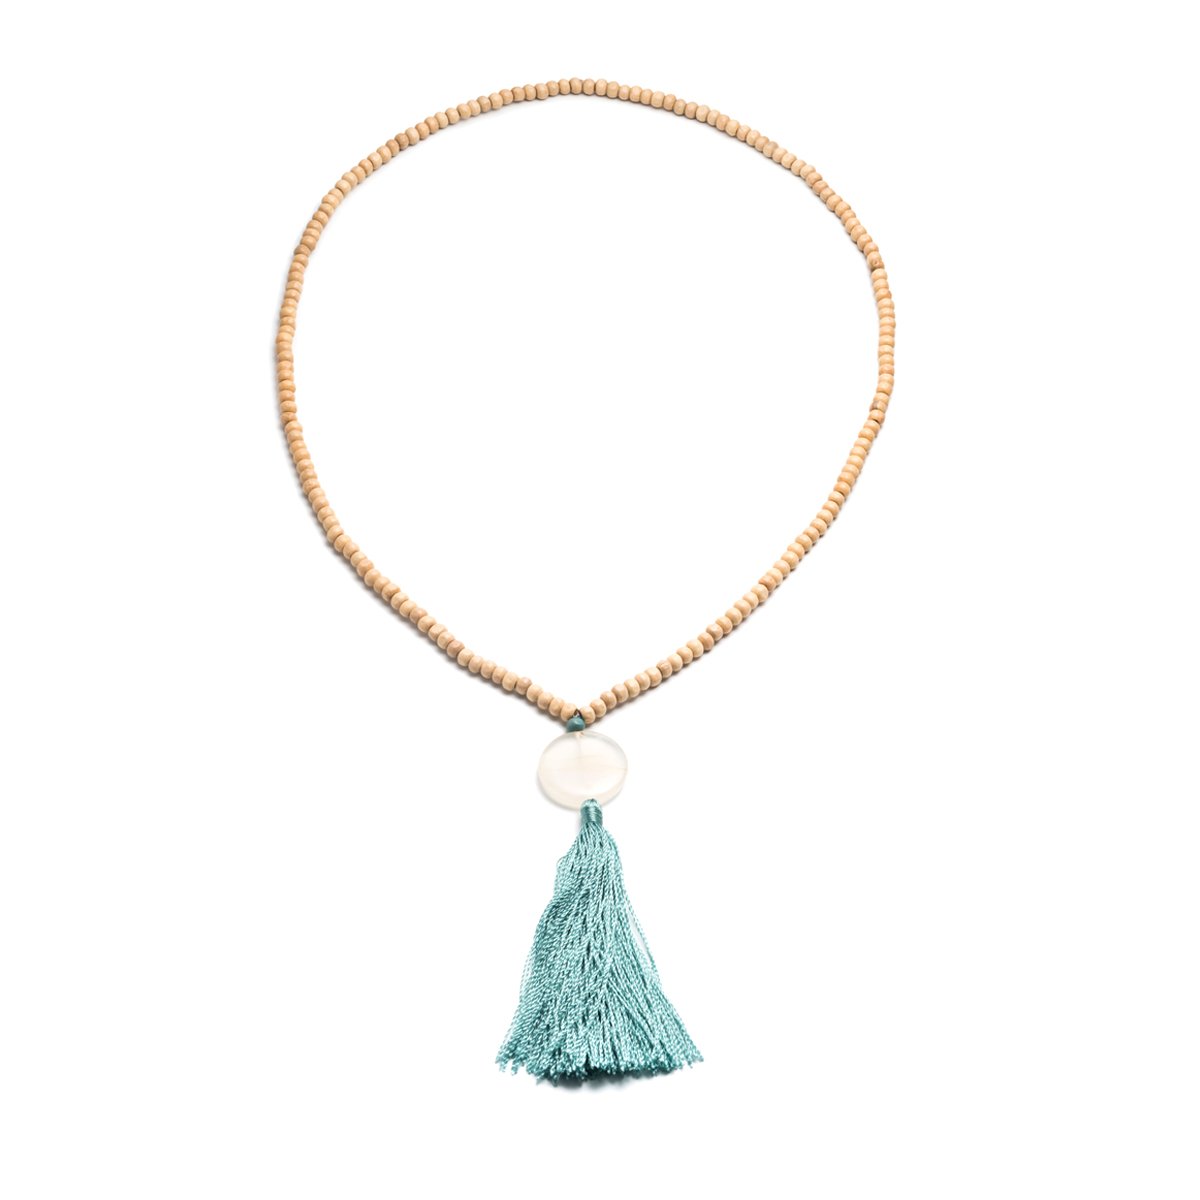 Angelco Accessories beaded turquoise tassel necklace